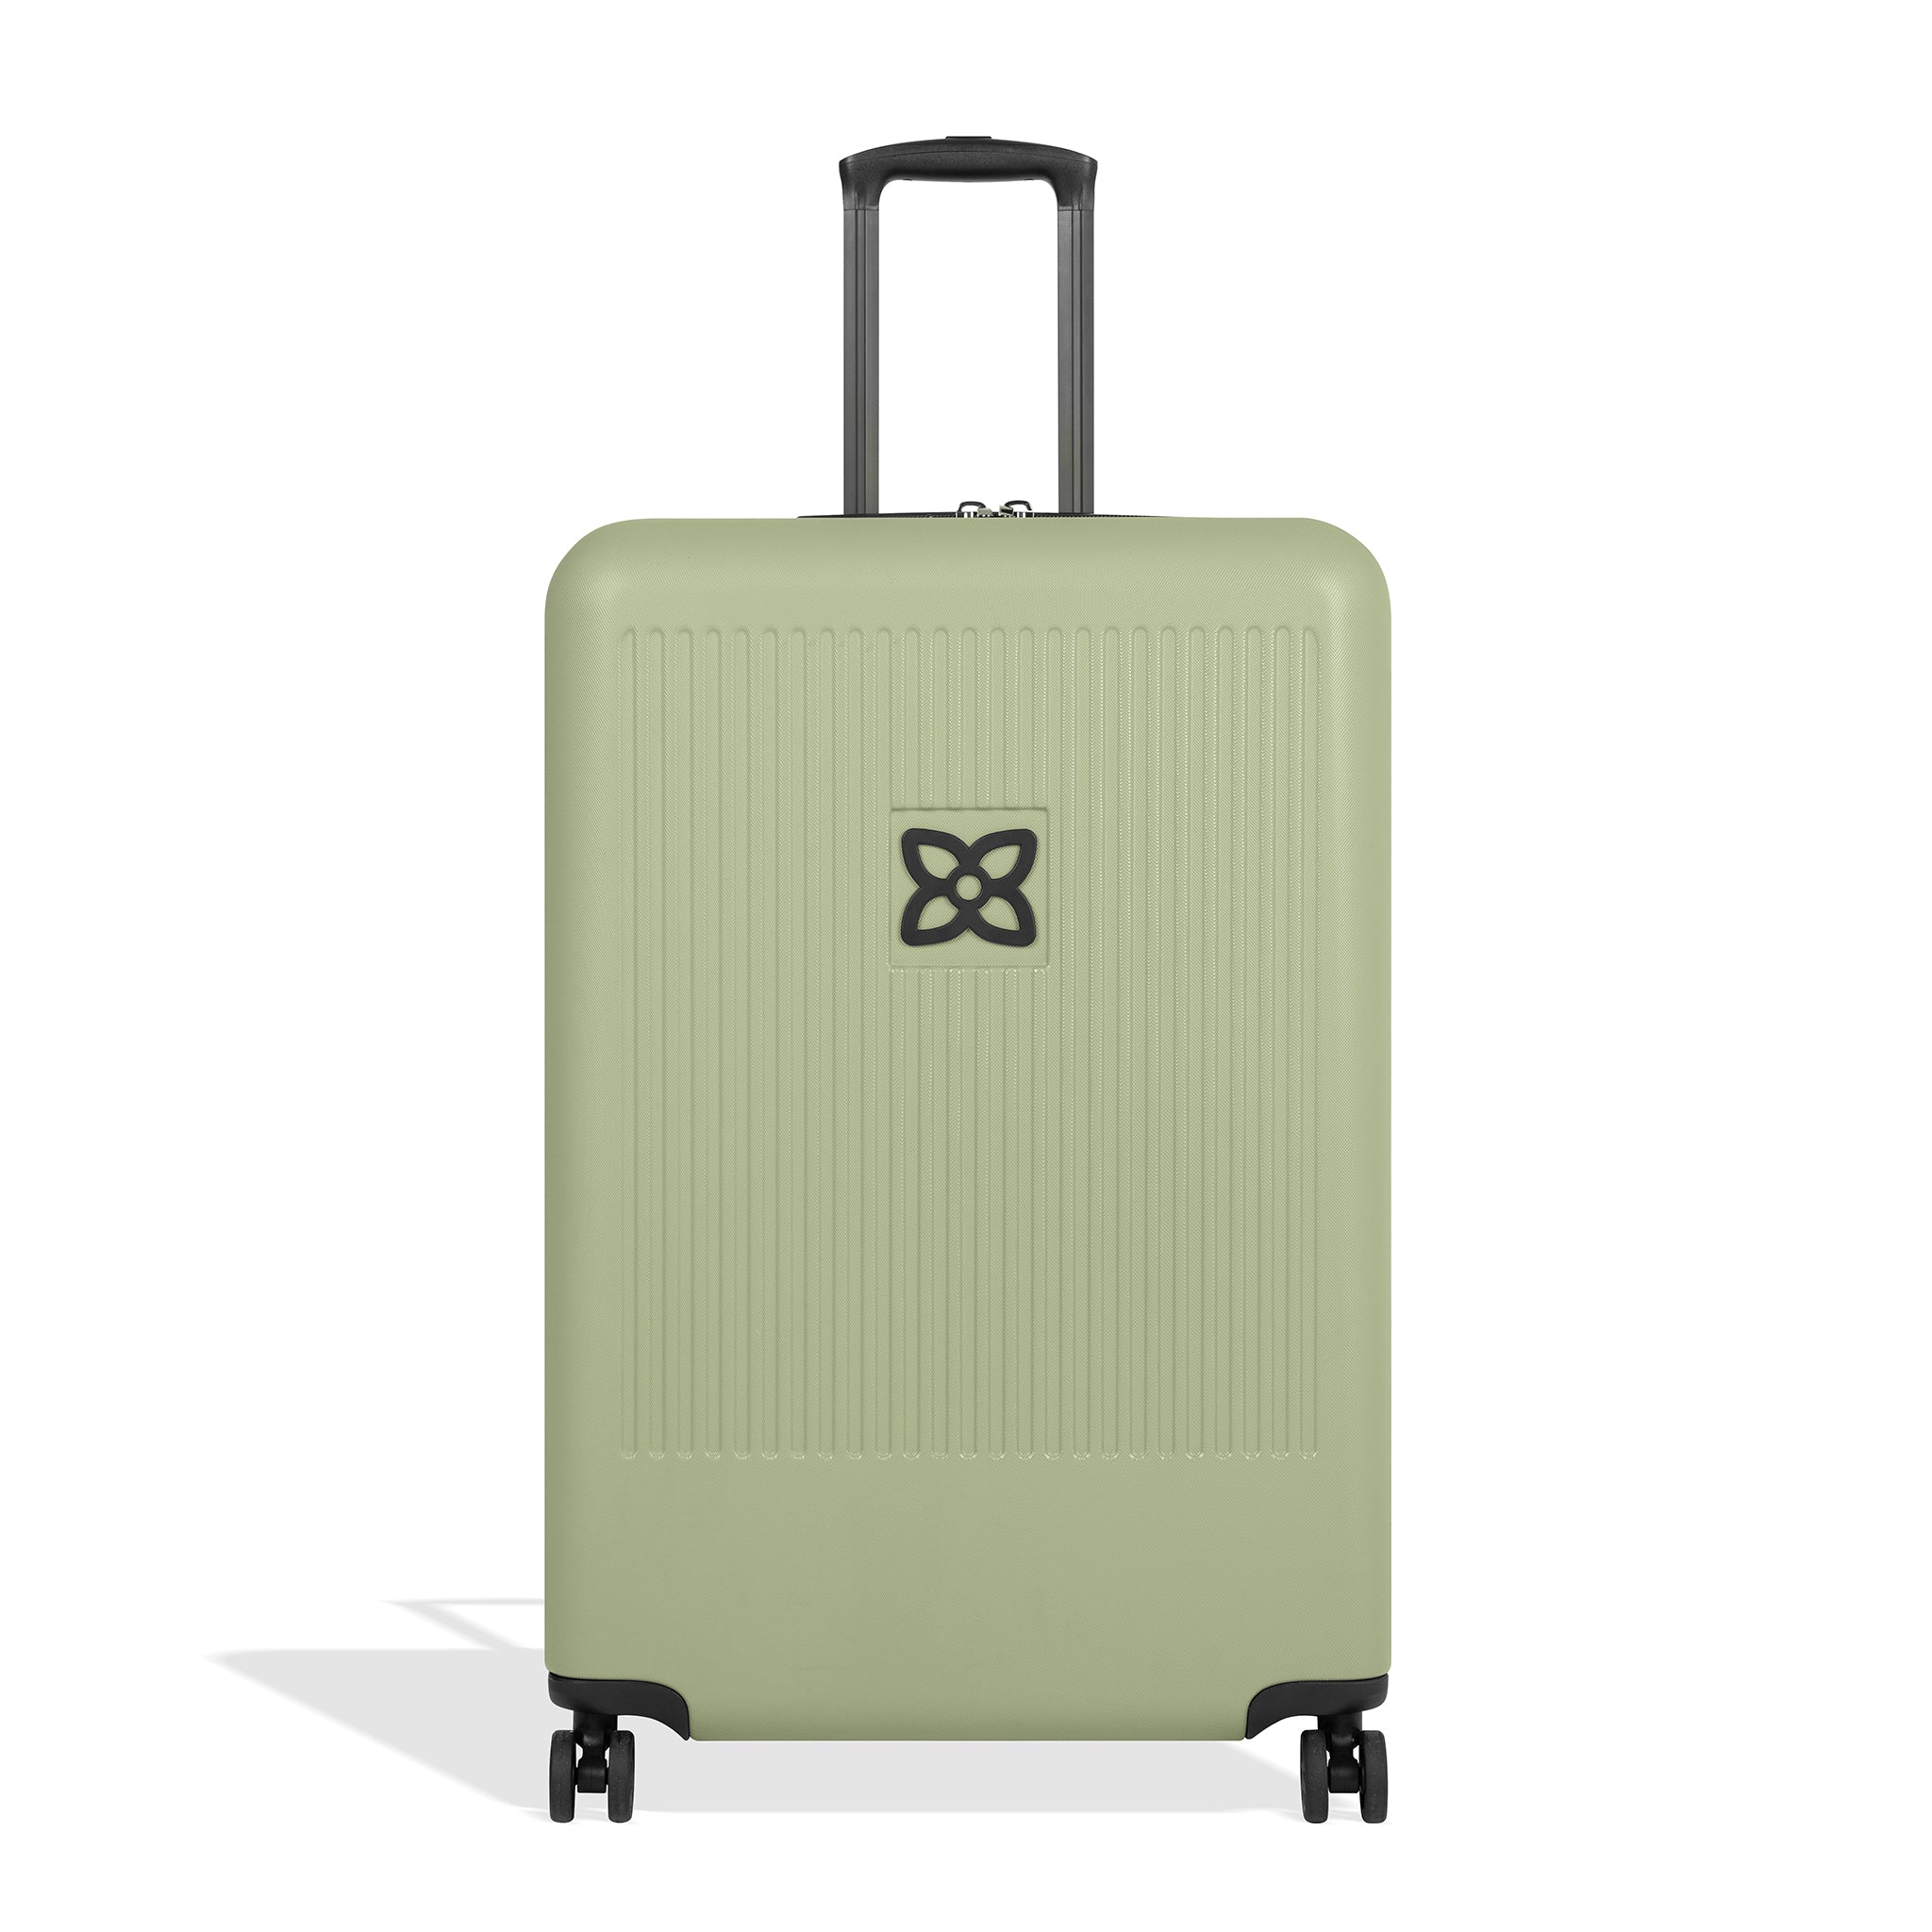 Flat front view of Sherpani hard-shell checked luggage, the Meridian in Sage. Meridian features include a retractable luggage handle, uncrushable exterior, TSA-approved locking zippers and four 36-degree spinner wheels. The Sage color is two-toned with the front of the suitcase in sage green and the back in classic black. 